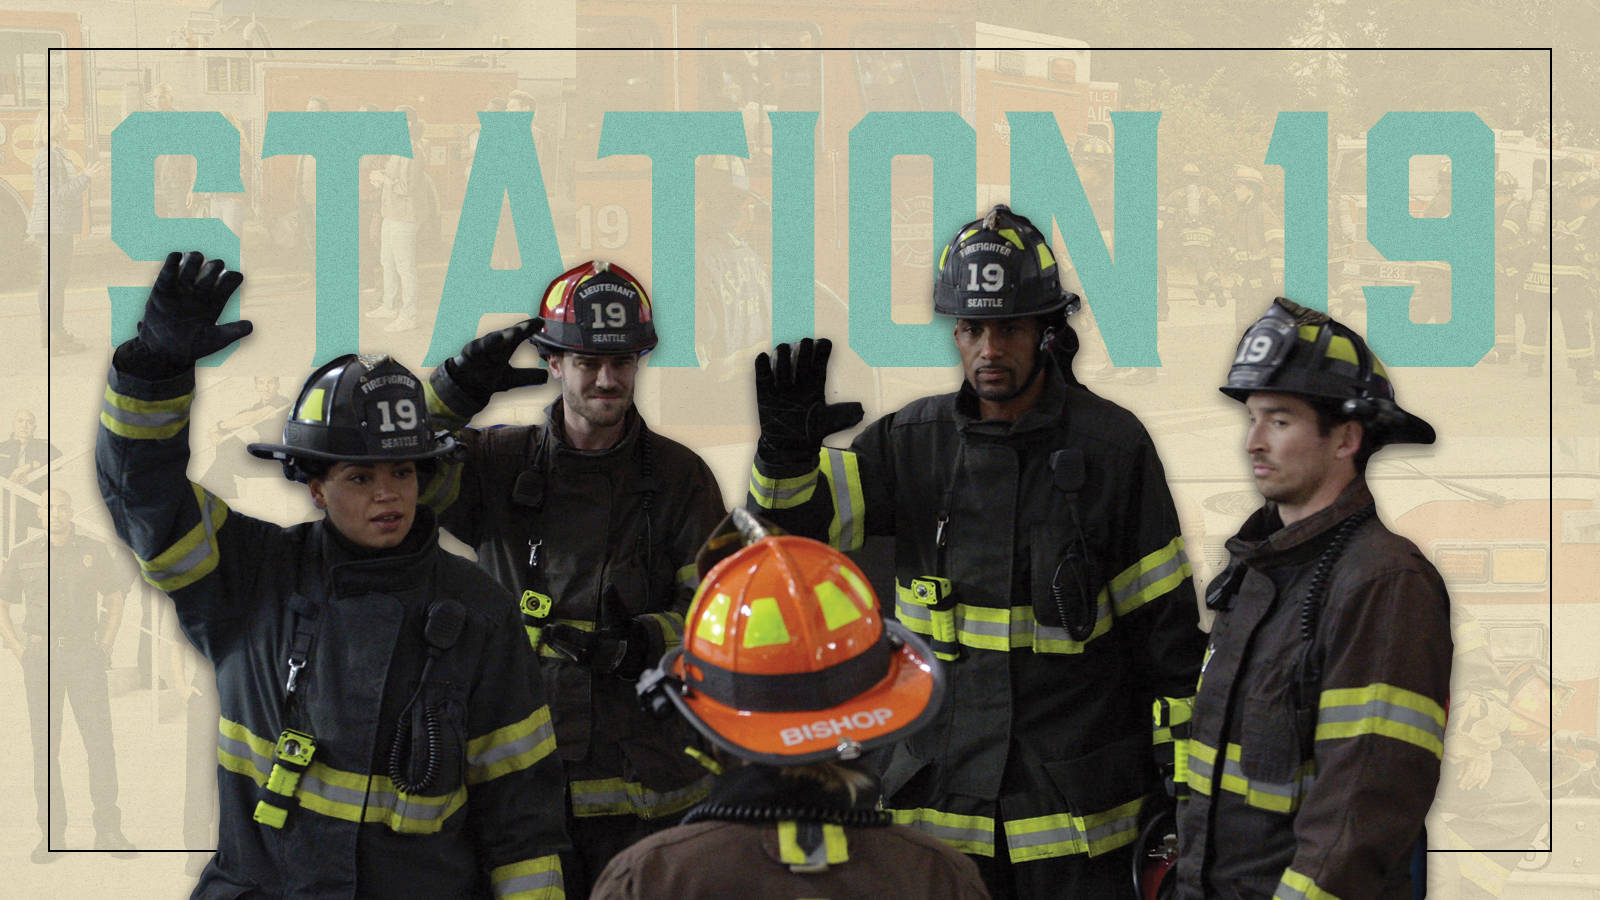 Station 19 Epic Members